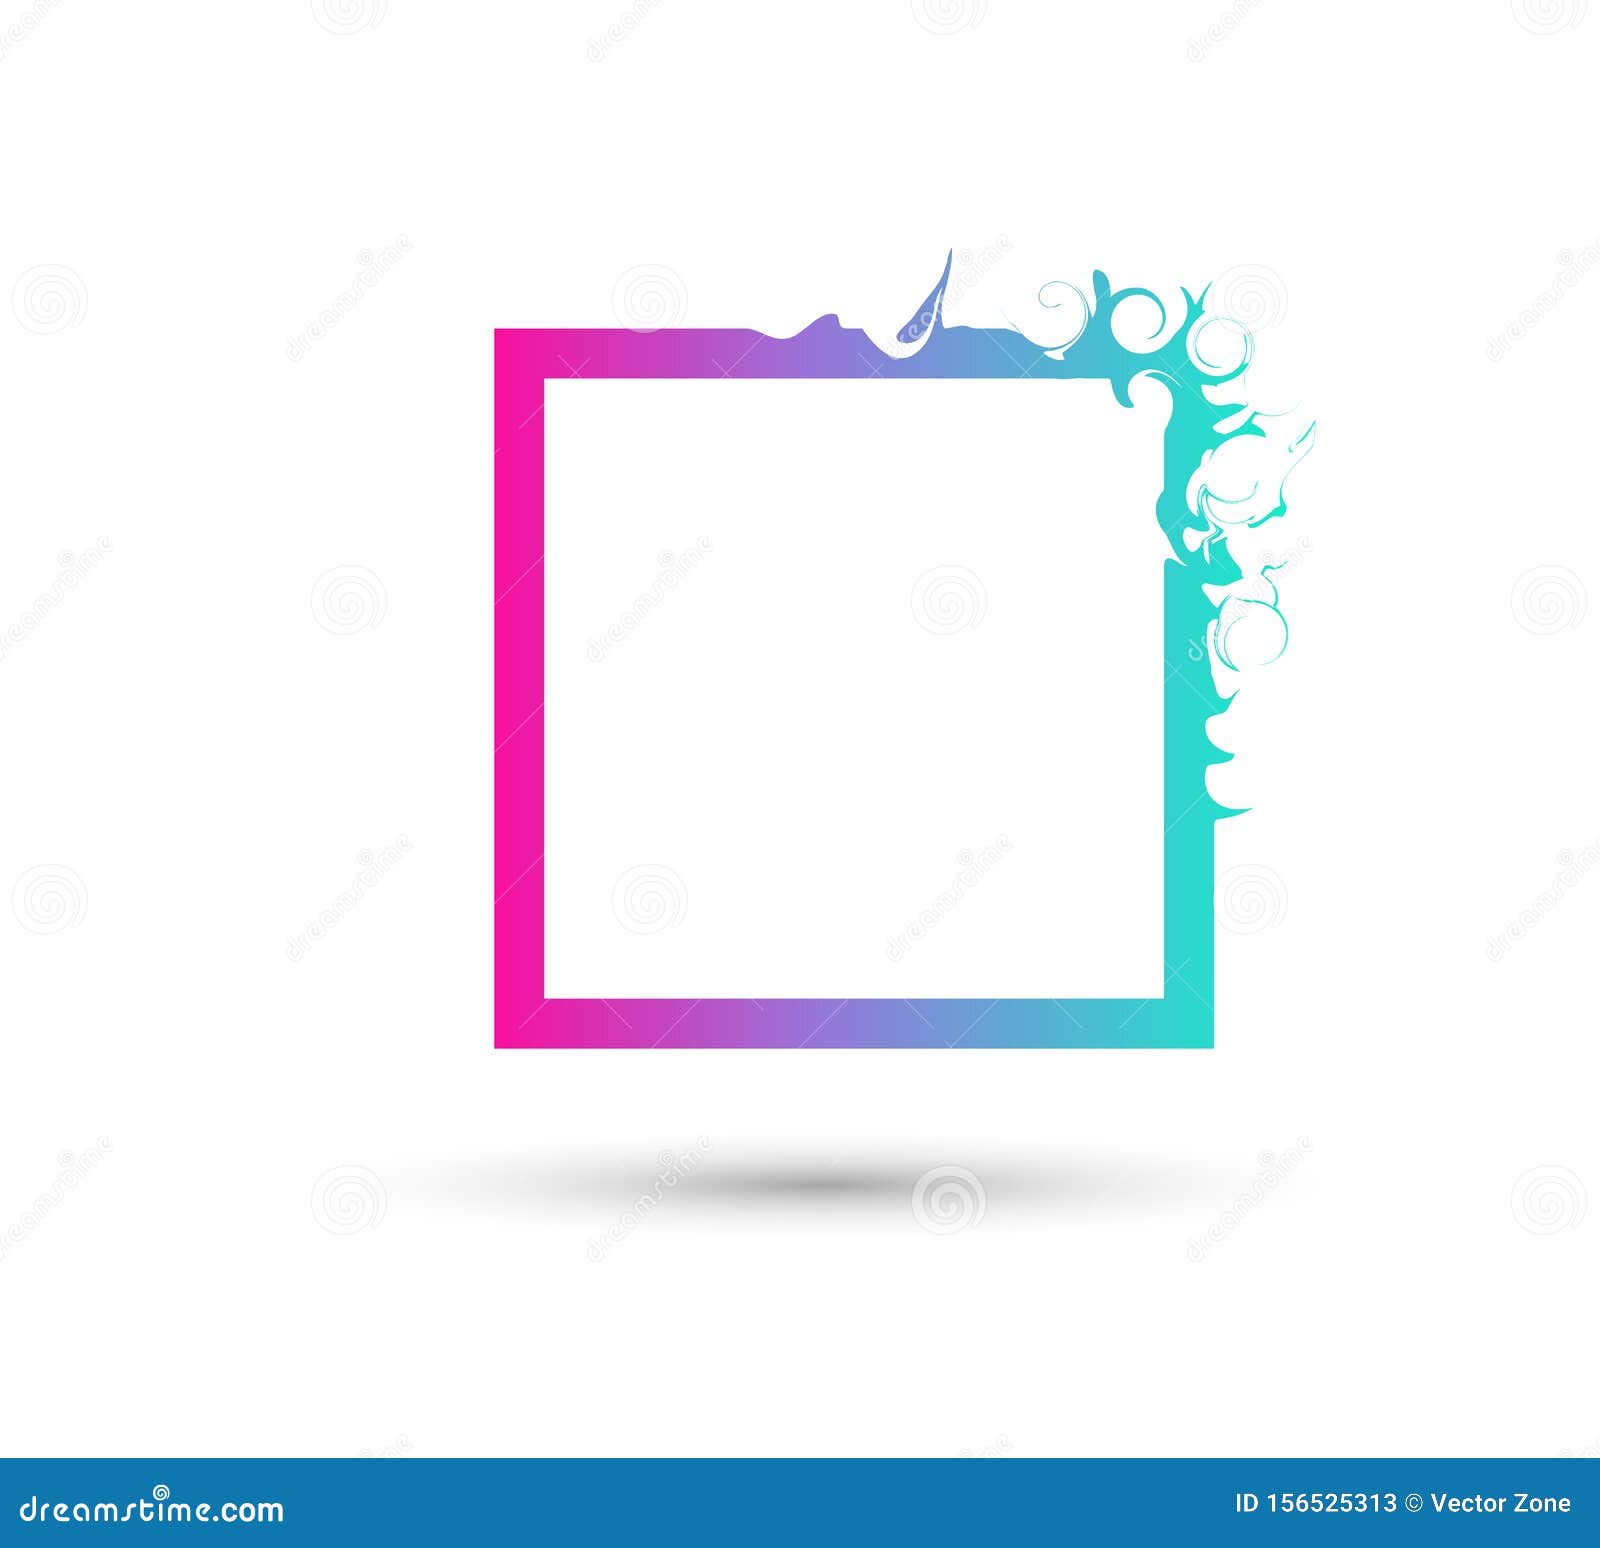 liquid colorful square logo. abstract gradient rectangle  with splash and drops. flux effect  for logo, banner, poster.